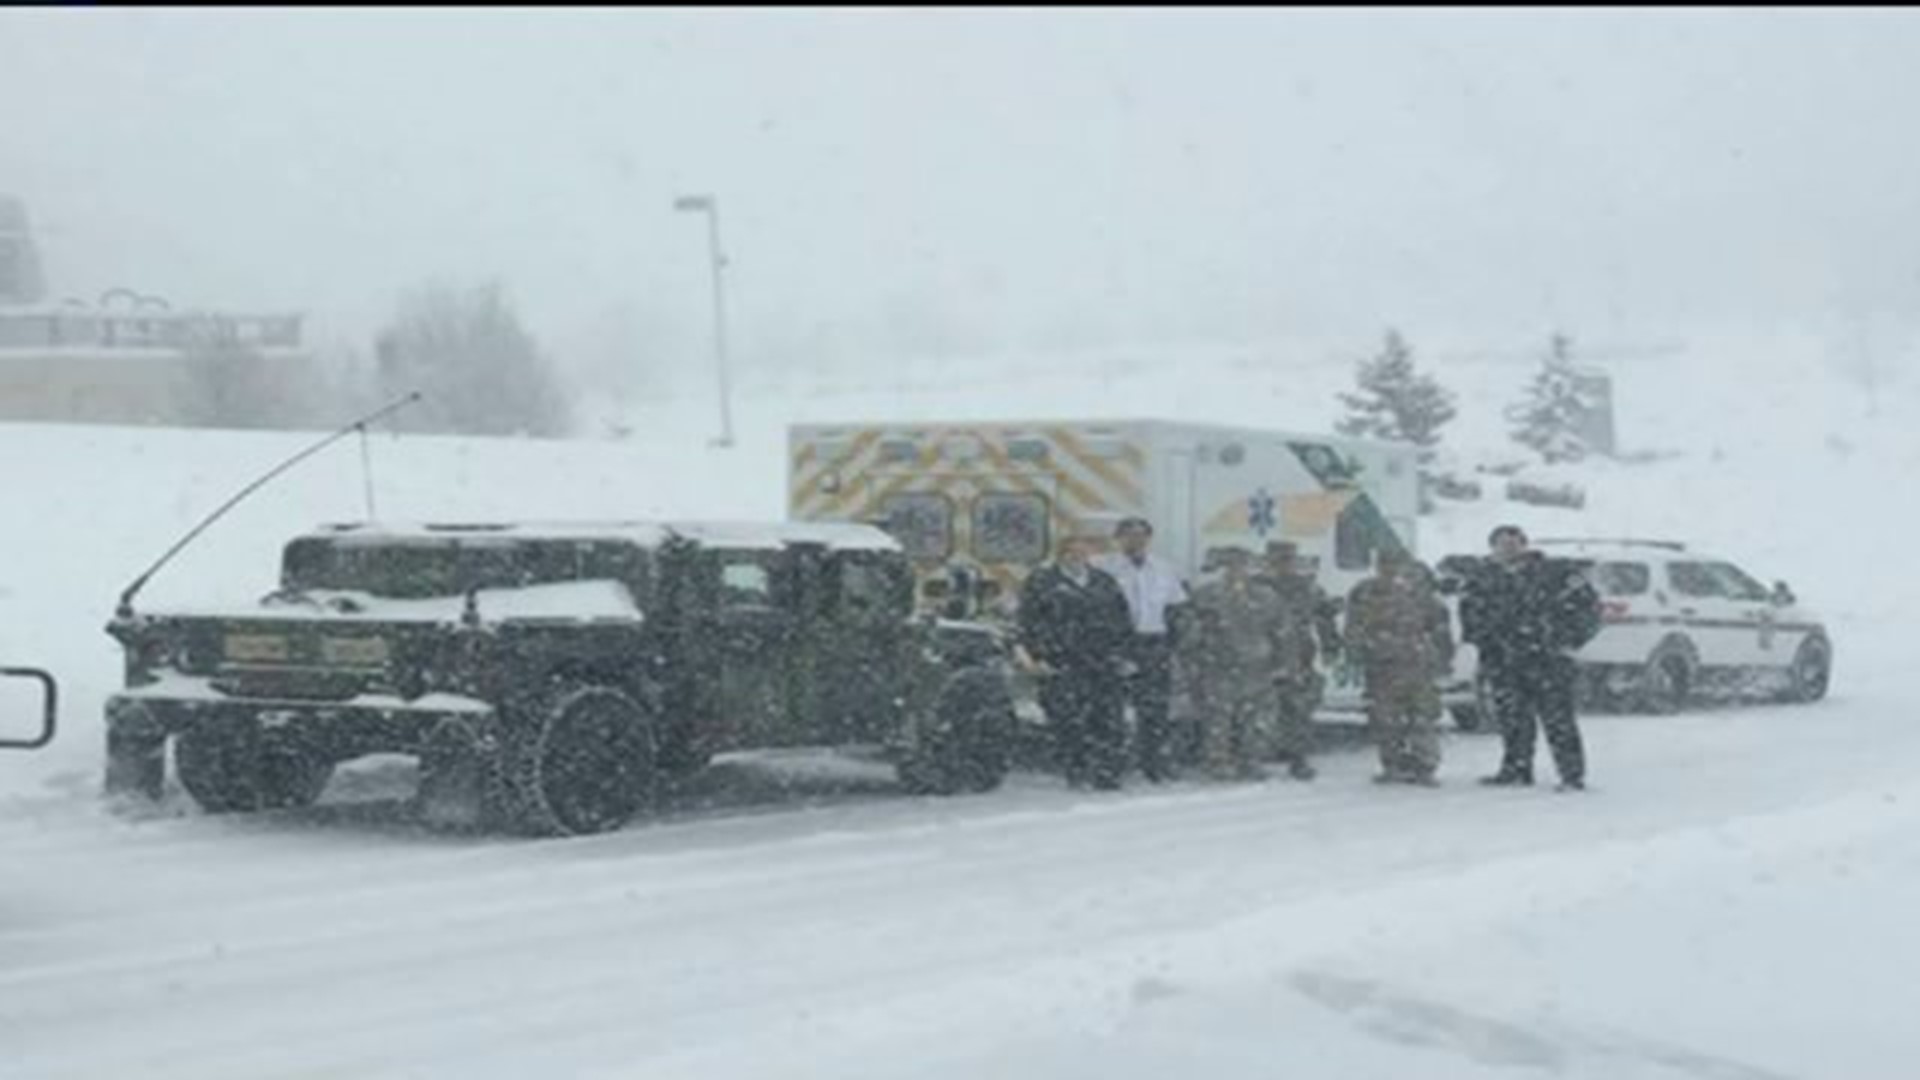 Medical Transport During Blizzard, Picture Goes Viral